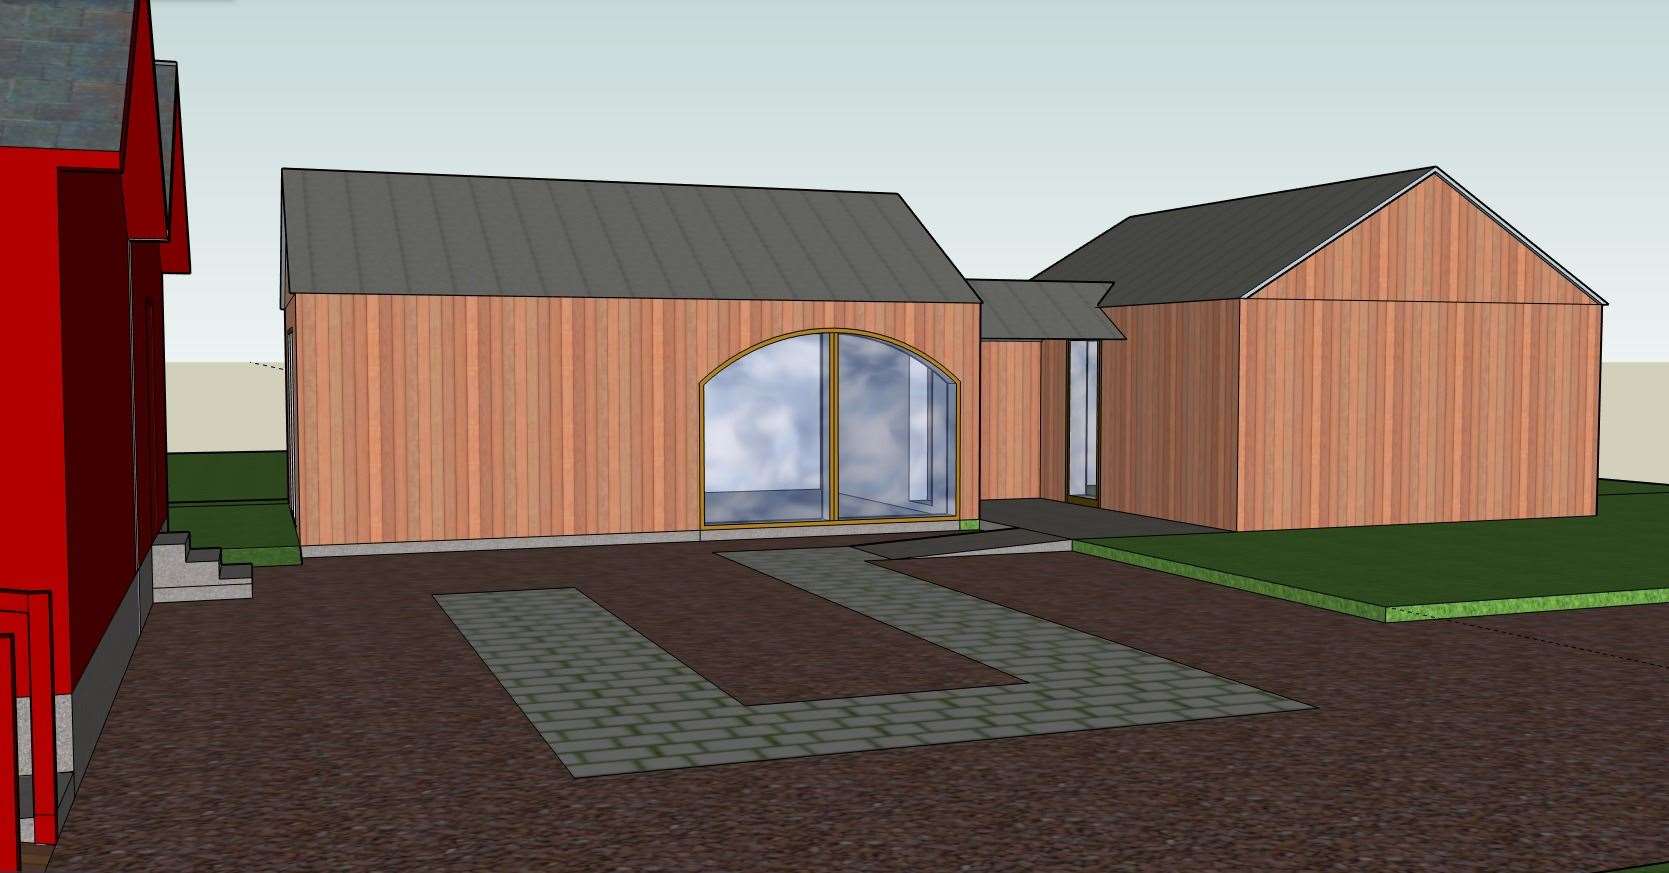 The classroom and extension design.